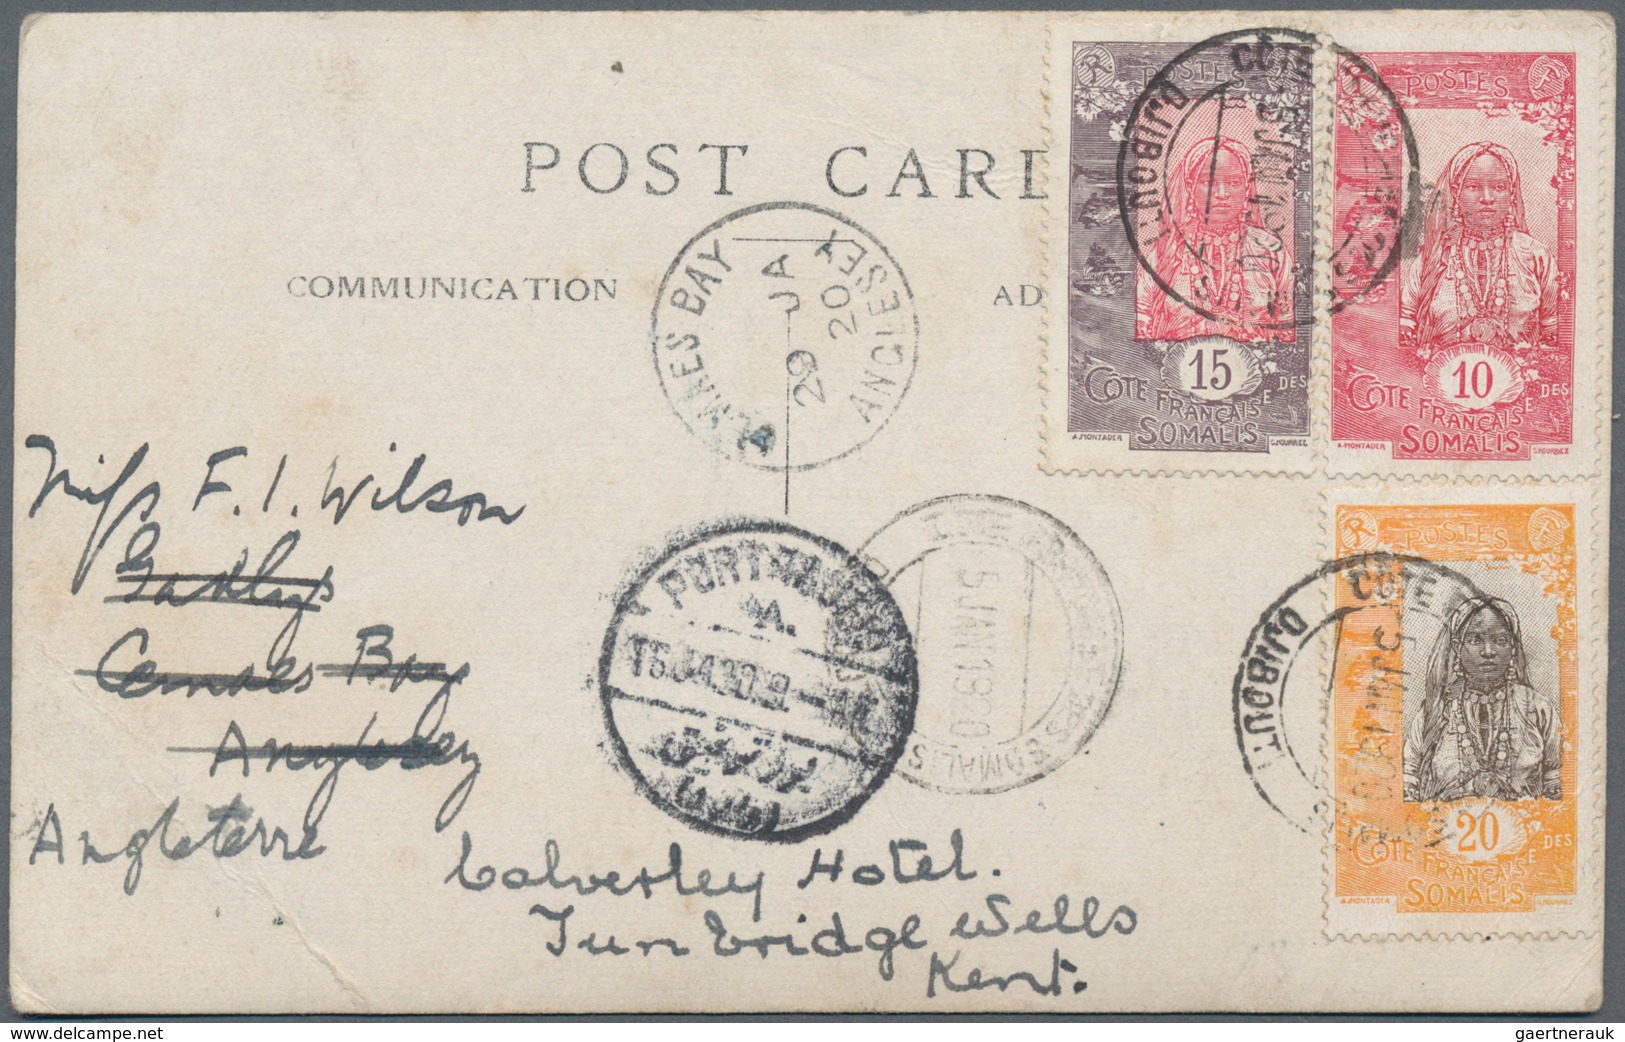 Afrika: 1890/2000 (ca.), British/French/Portuguese area, holding of apprx. 400 covers/cards/ station